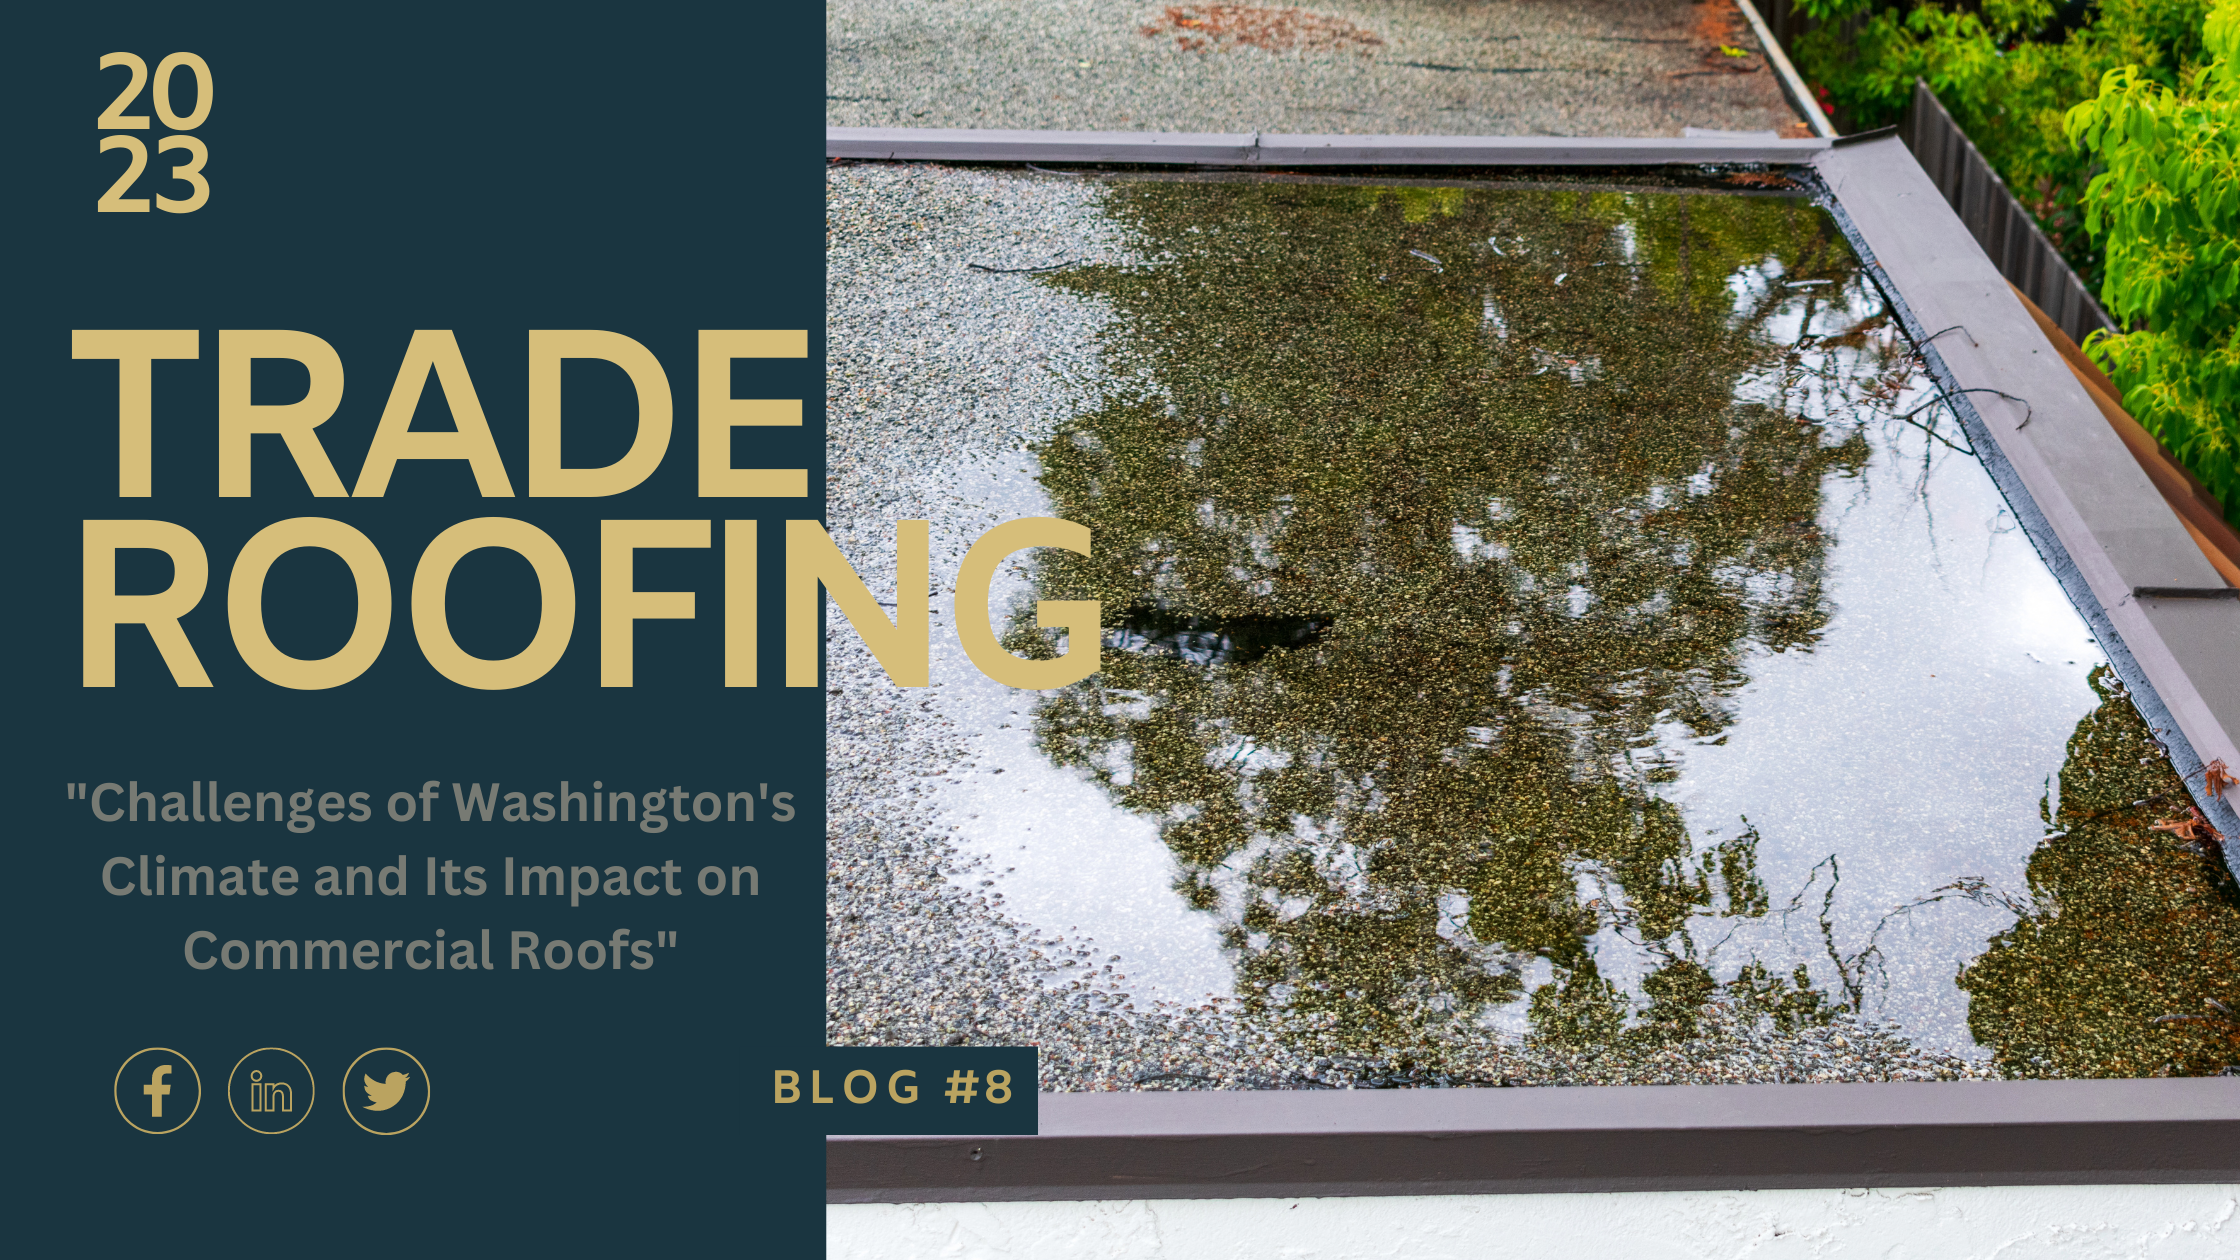 Challenges of Washington's Climate and Its Impact on Commercial Roofs